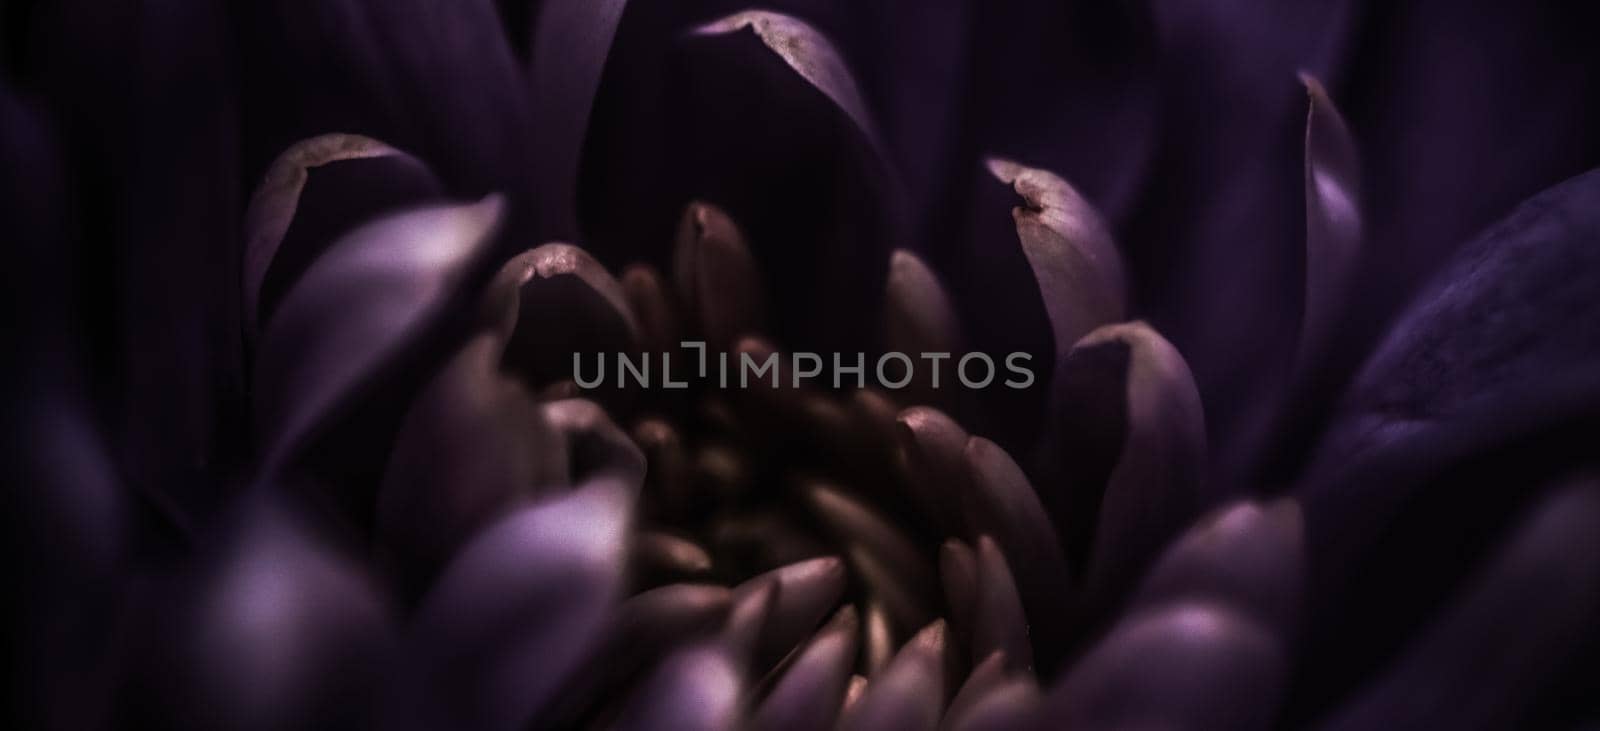 Purple daisy flower petals in bloom, abstract floral blossom art background, flowers in spring nature for perfume scent, wedding, luxury beauty brand holiday design by Anneleven